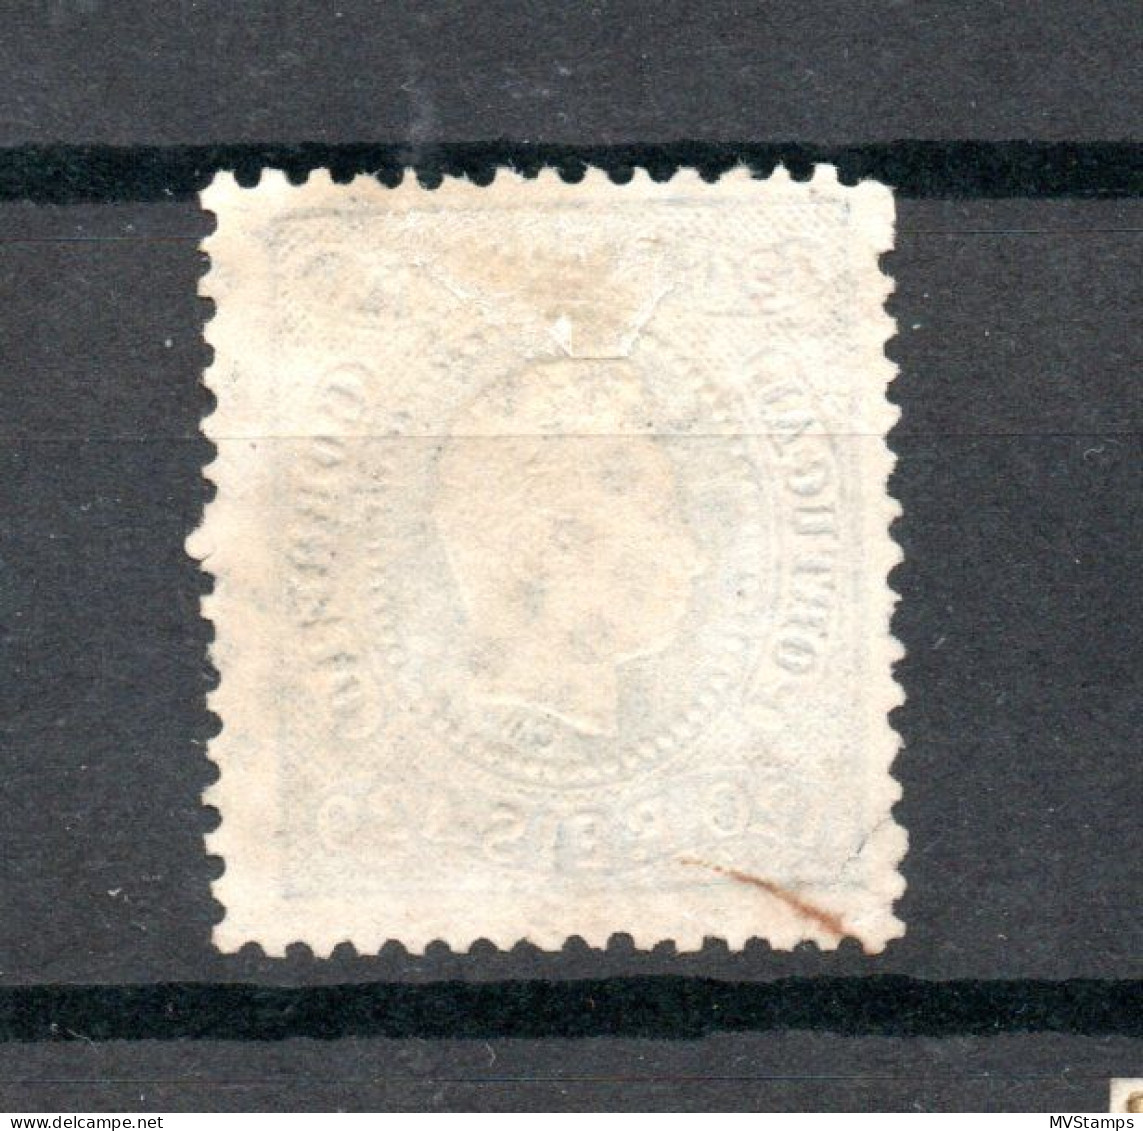 Portugal 1867 Old King Luis I Stamp (Michel 32) Nice Used - Used Stamps